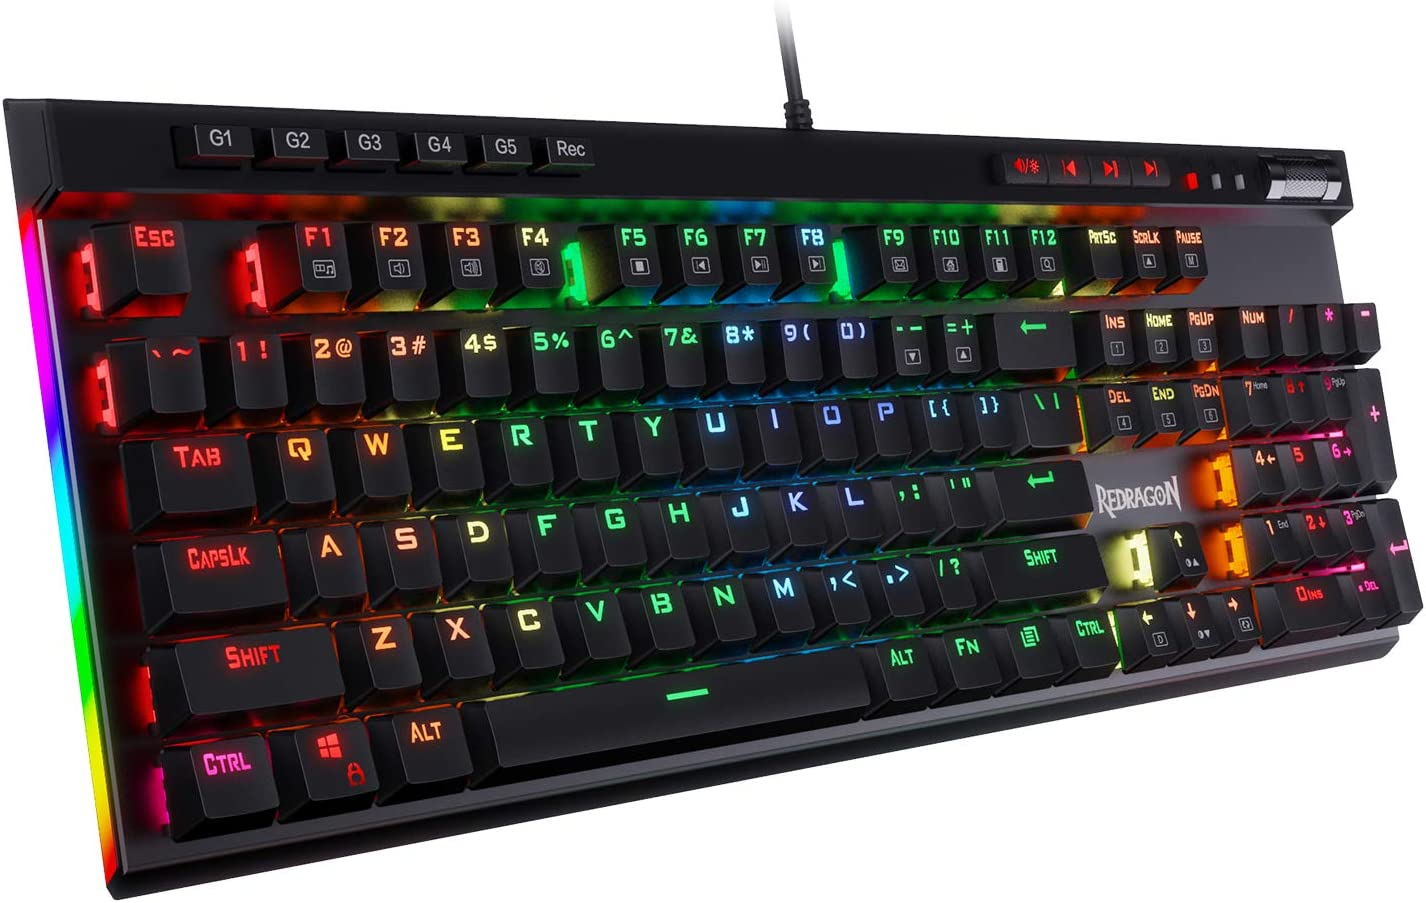 A gaming keyboard that lights up allows a gamer to find different keys easily even in low-light conditions. 